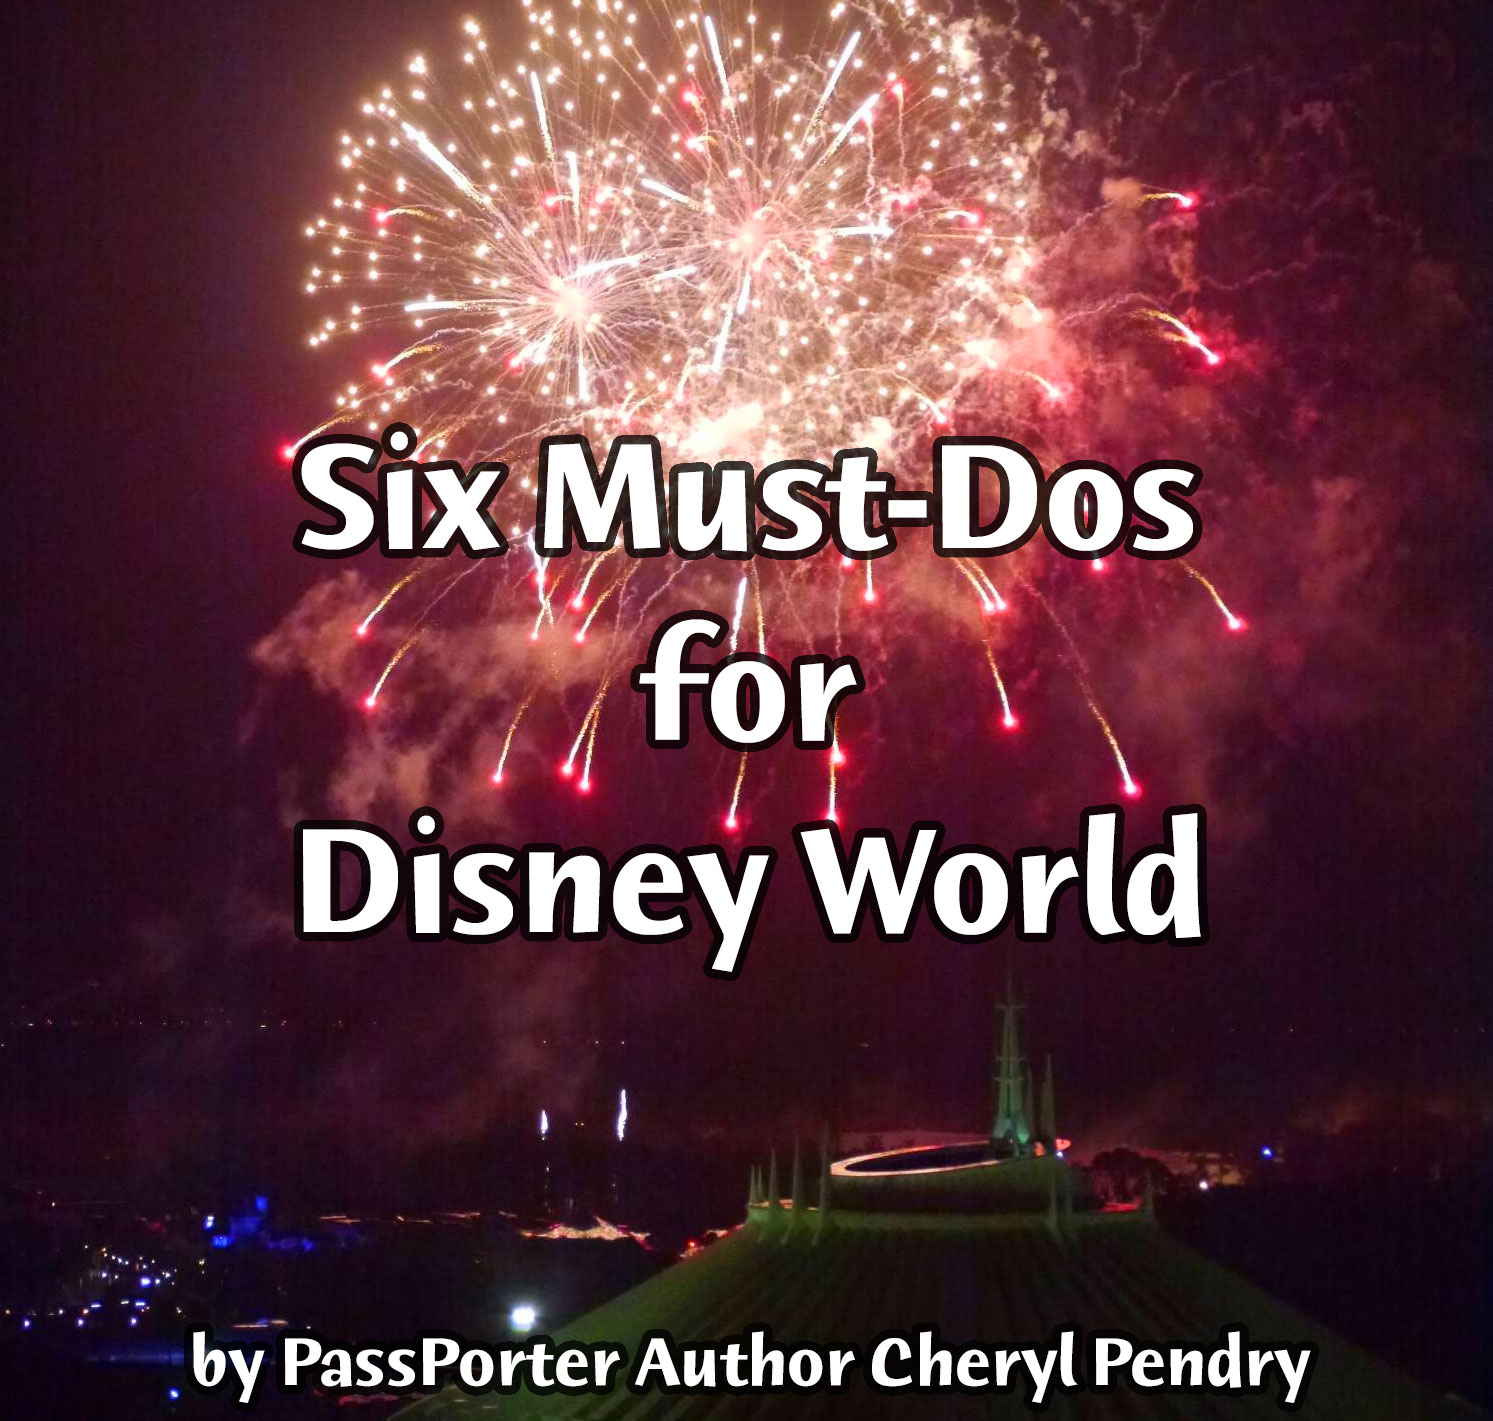 Six Must-Dos for Disney World